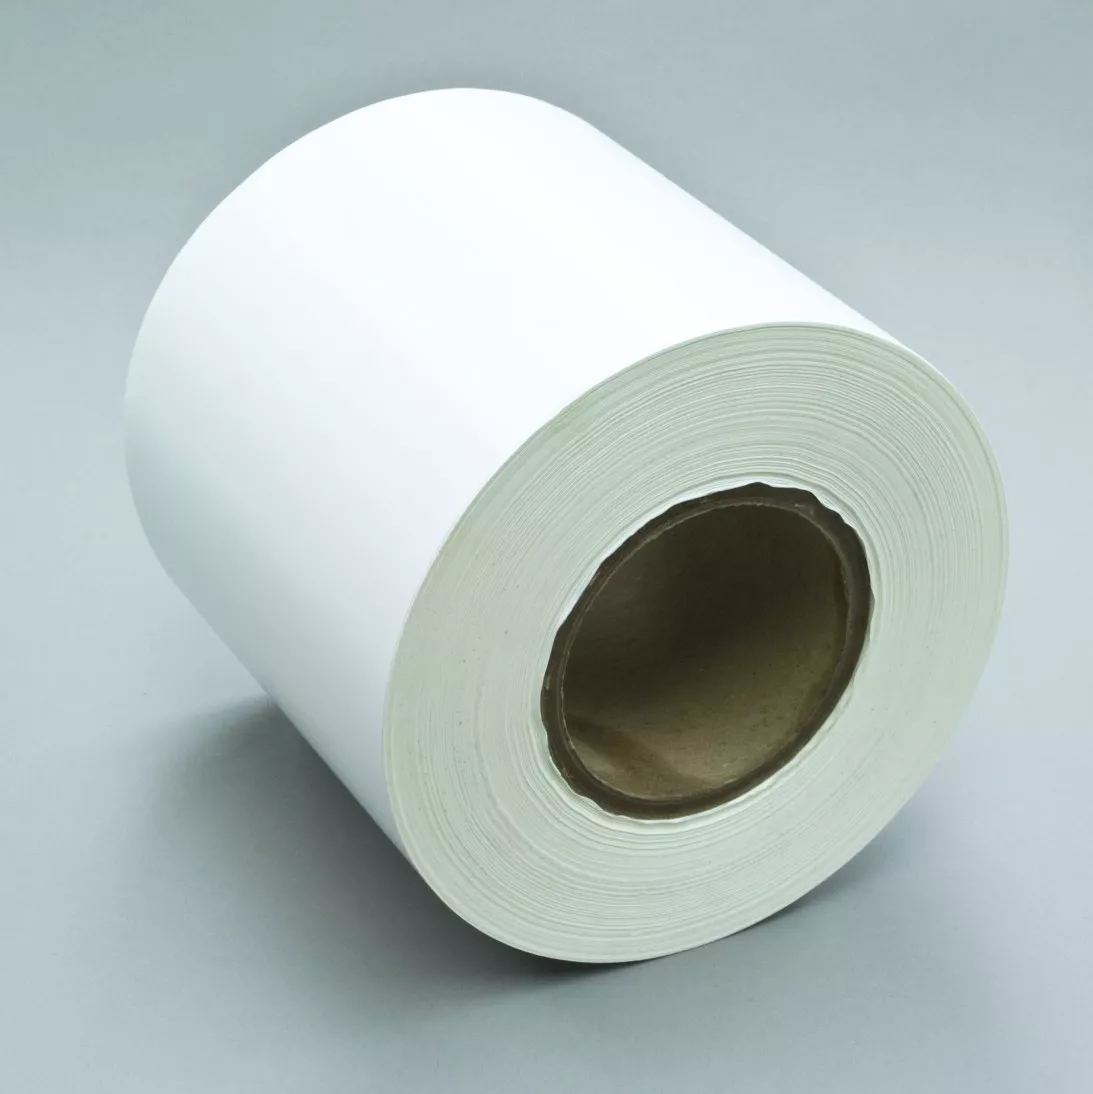 3M™ Sheet and Screen Label Material 7051SA, Soft White EL Vinyl, 54 in x
750 ft, 1 roll per case